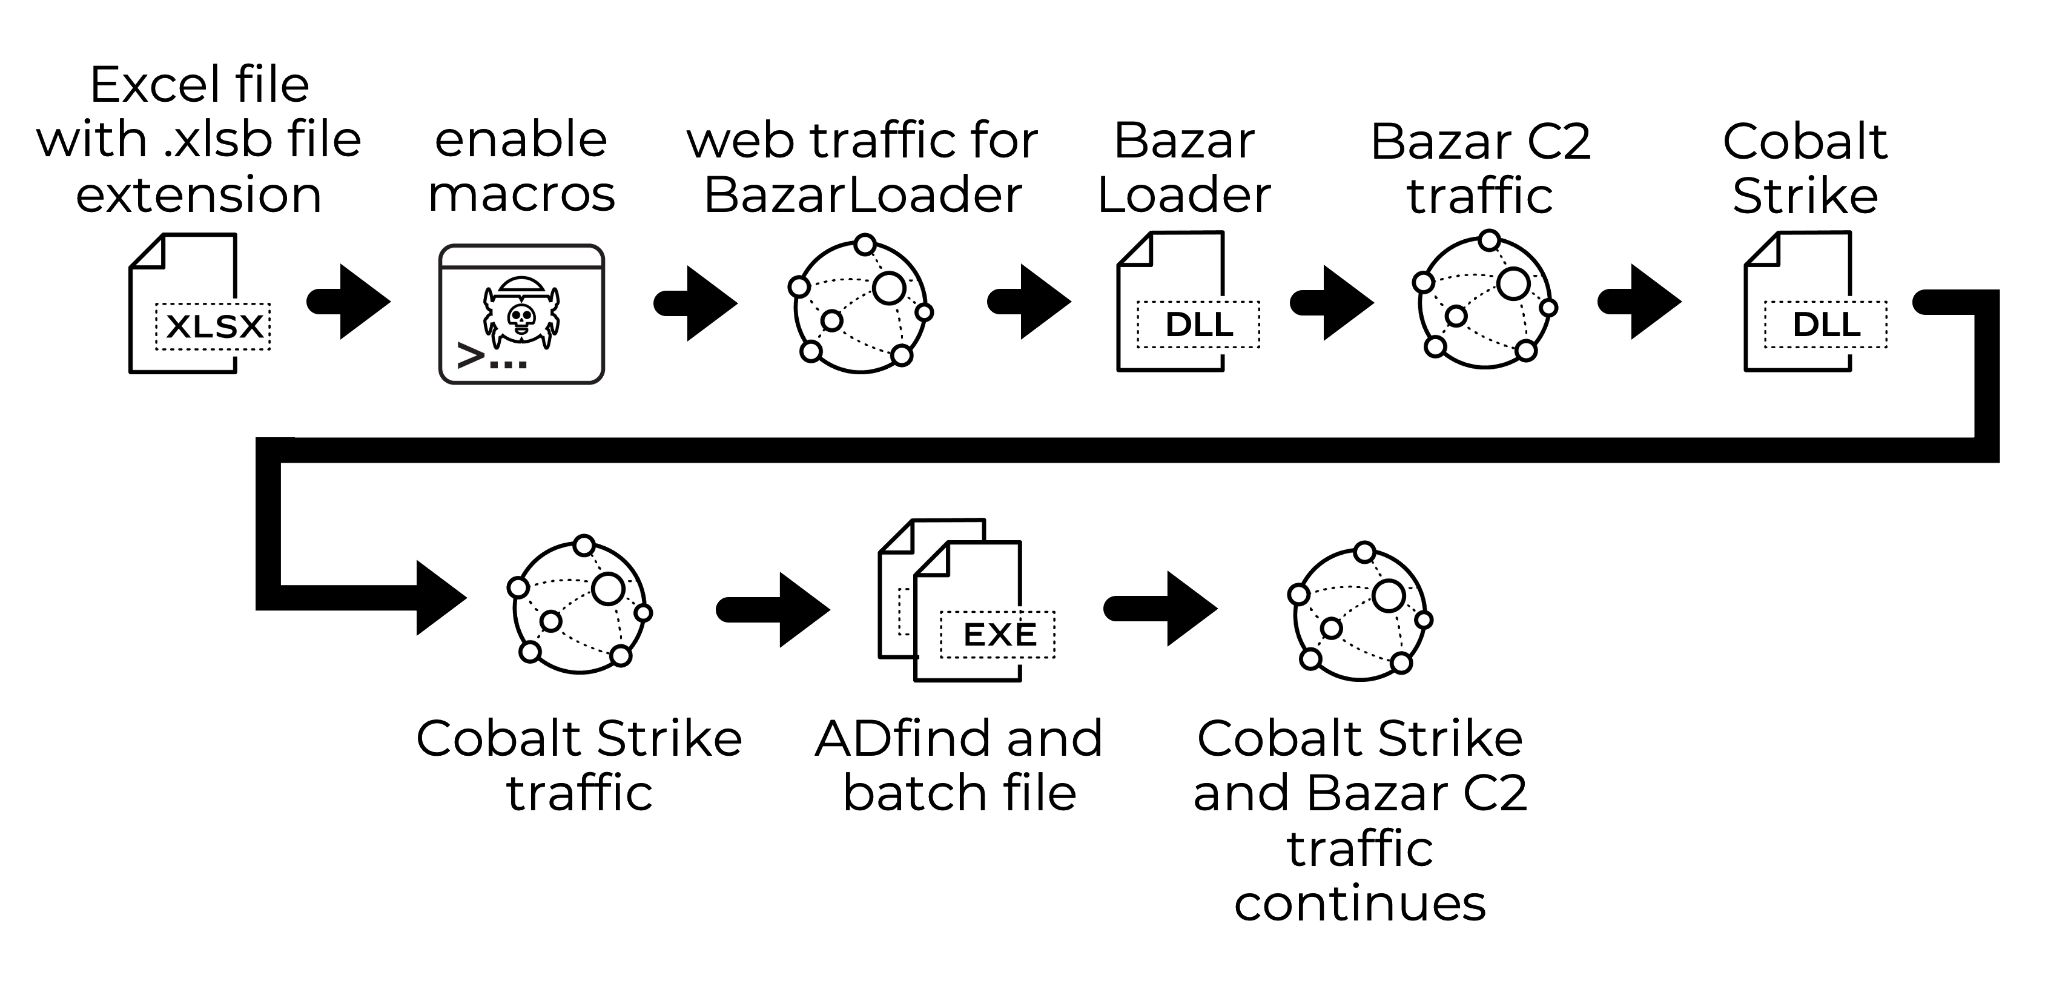 Chain of events from BazarLoader infection on Aug. 19, 2021. Excel file with .xlsb file extension, enable macros, web traffic for BazarLoader, BazarLoader, Bazar C2 traffic, Cobalt Strike, Cobalt Strike traffic, ADfind and batch file, Cobalt Strike and Bazar C2 traffic continues